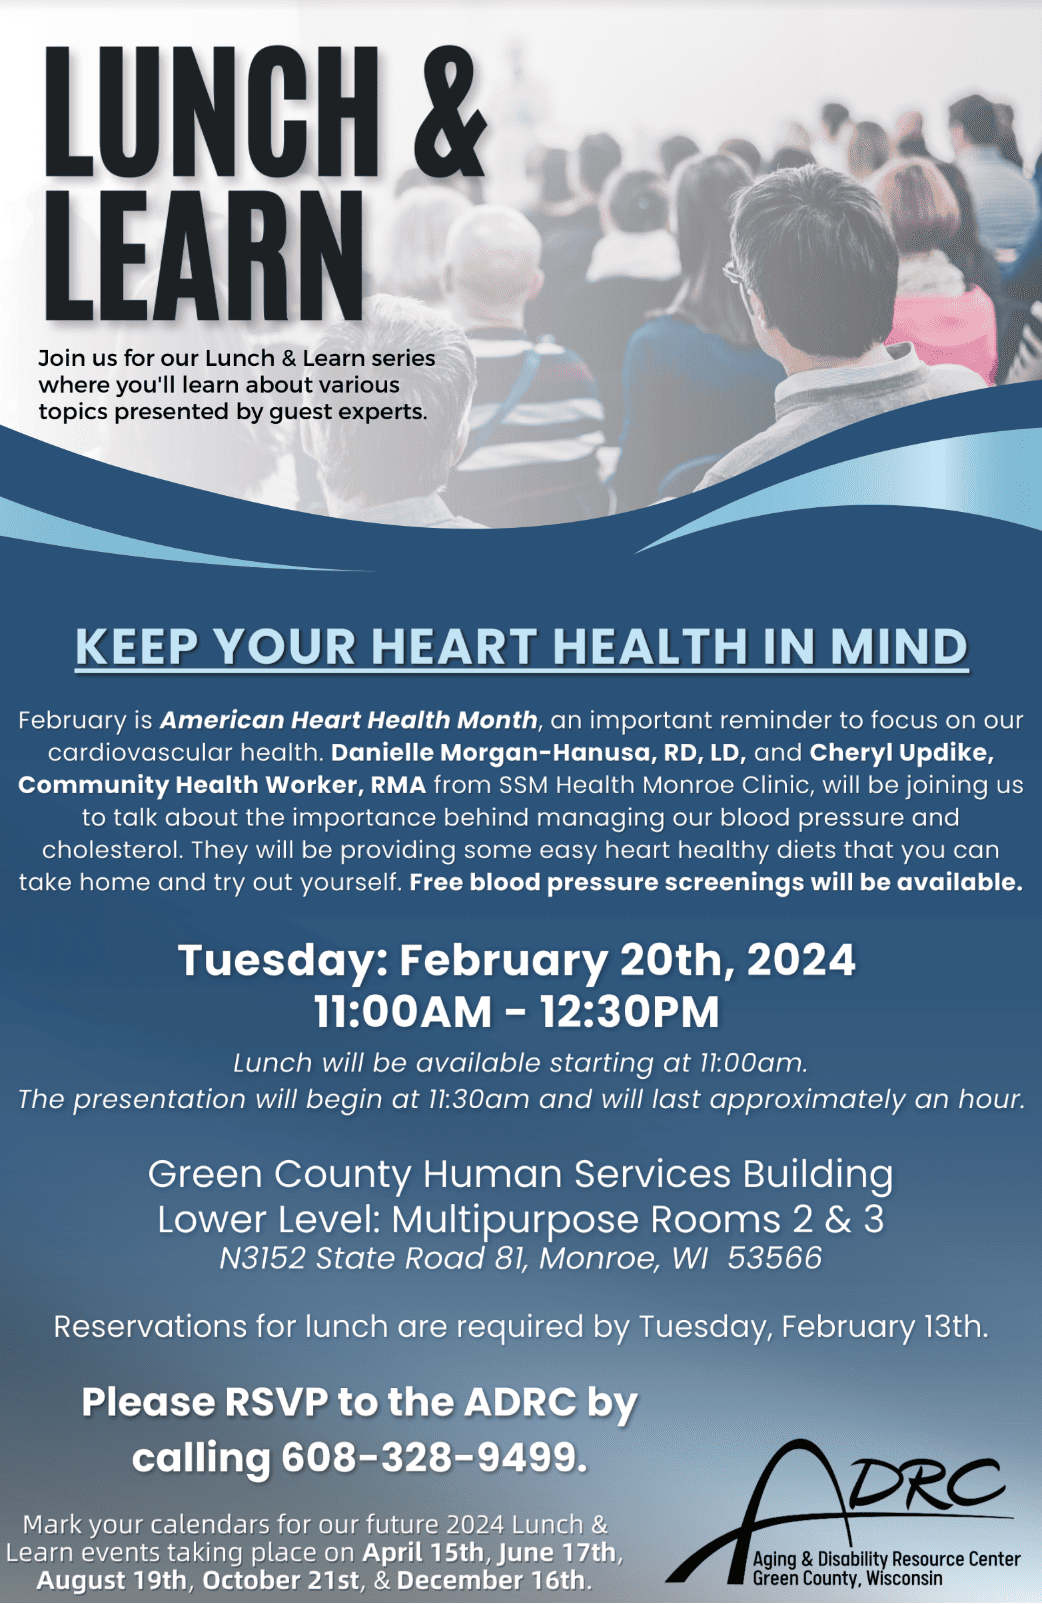 Lunch & Learn - Keep Your Heart Health in Mind @ Green County Human Services Building - Lower Level Multi Purpose Rooms